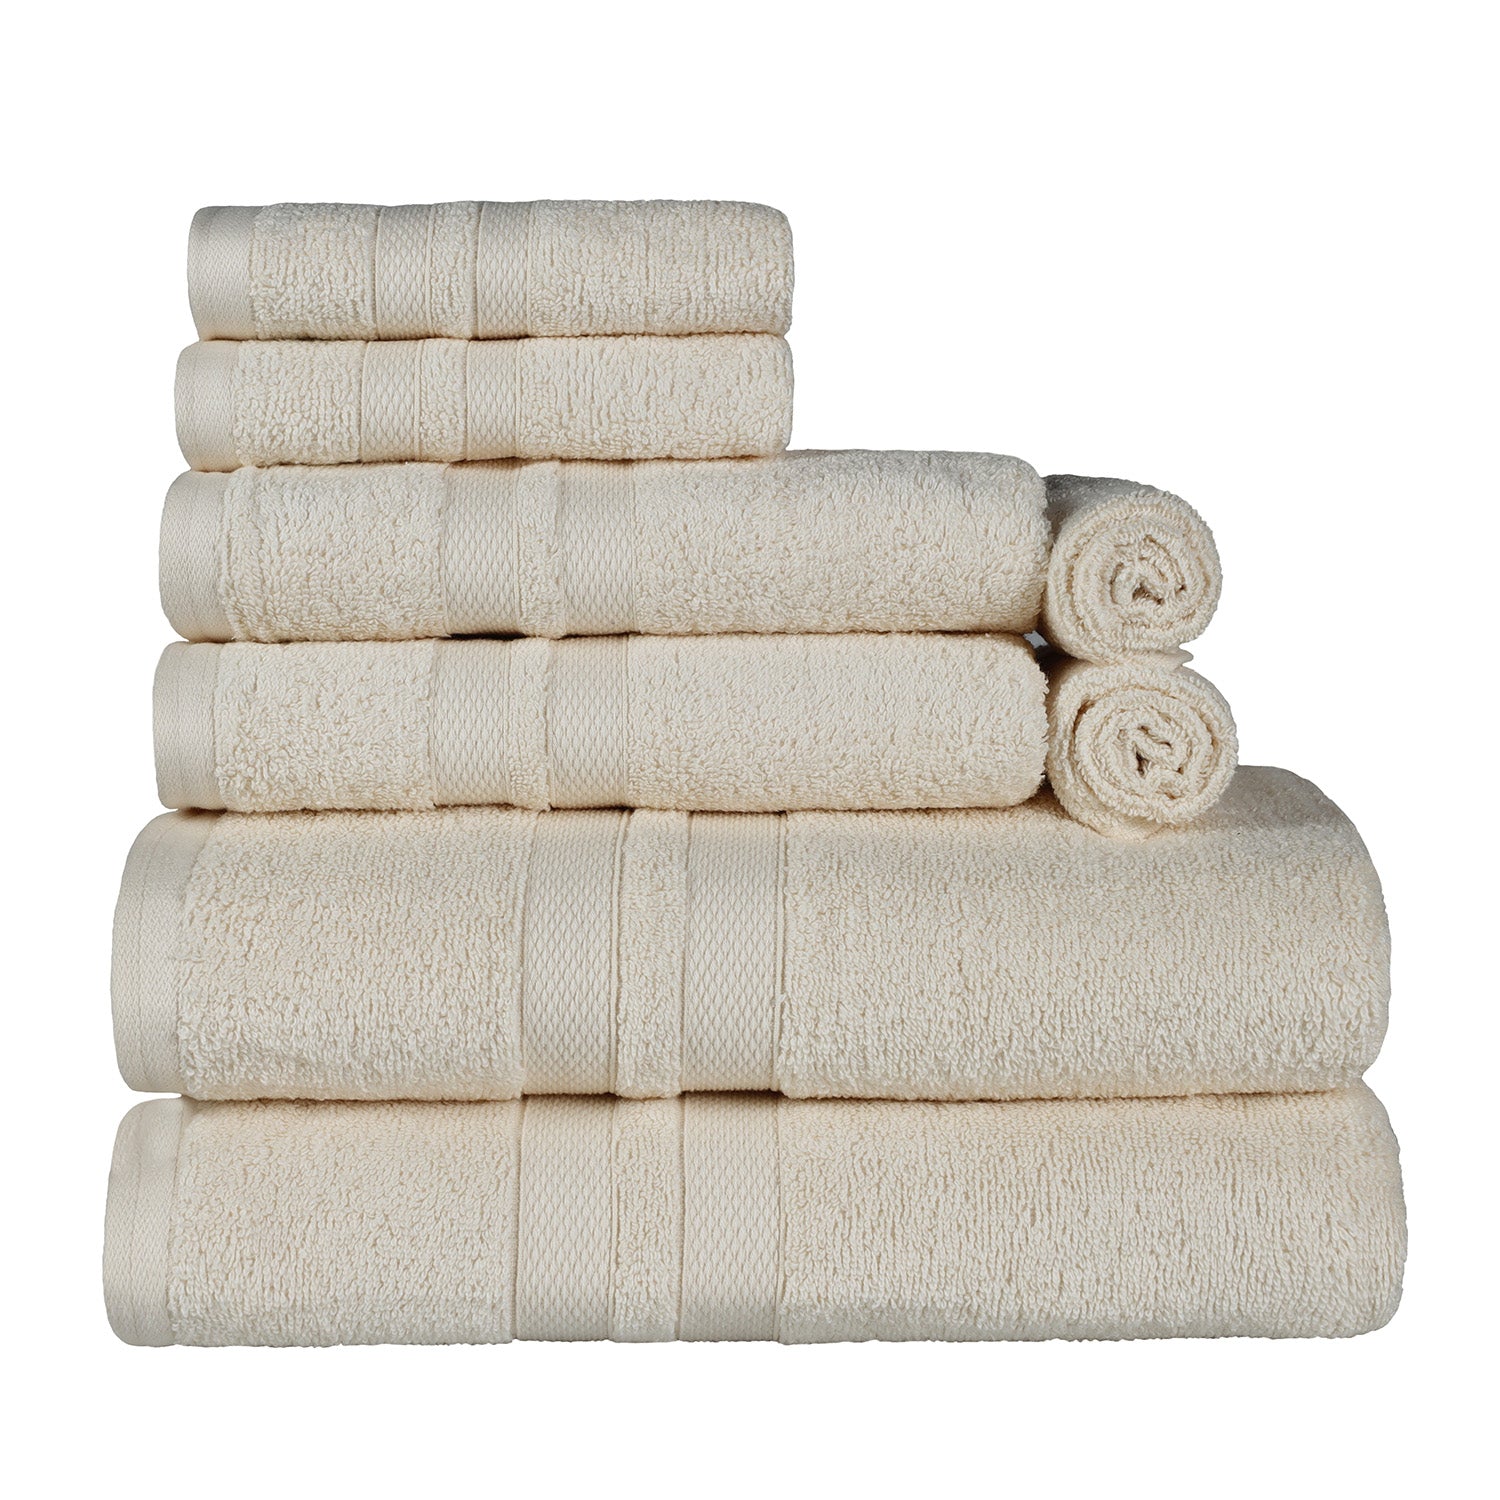 Superior Ultra Soft Cotton Absorbent Solid Assorted 8-Piece Towel Set - CReam